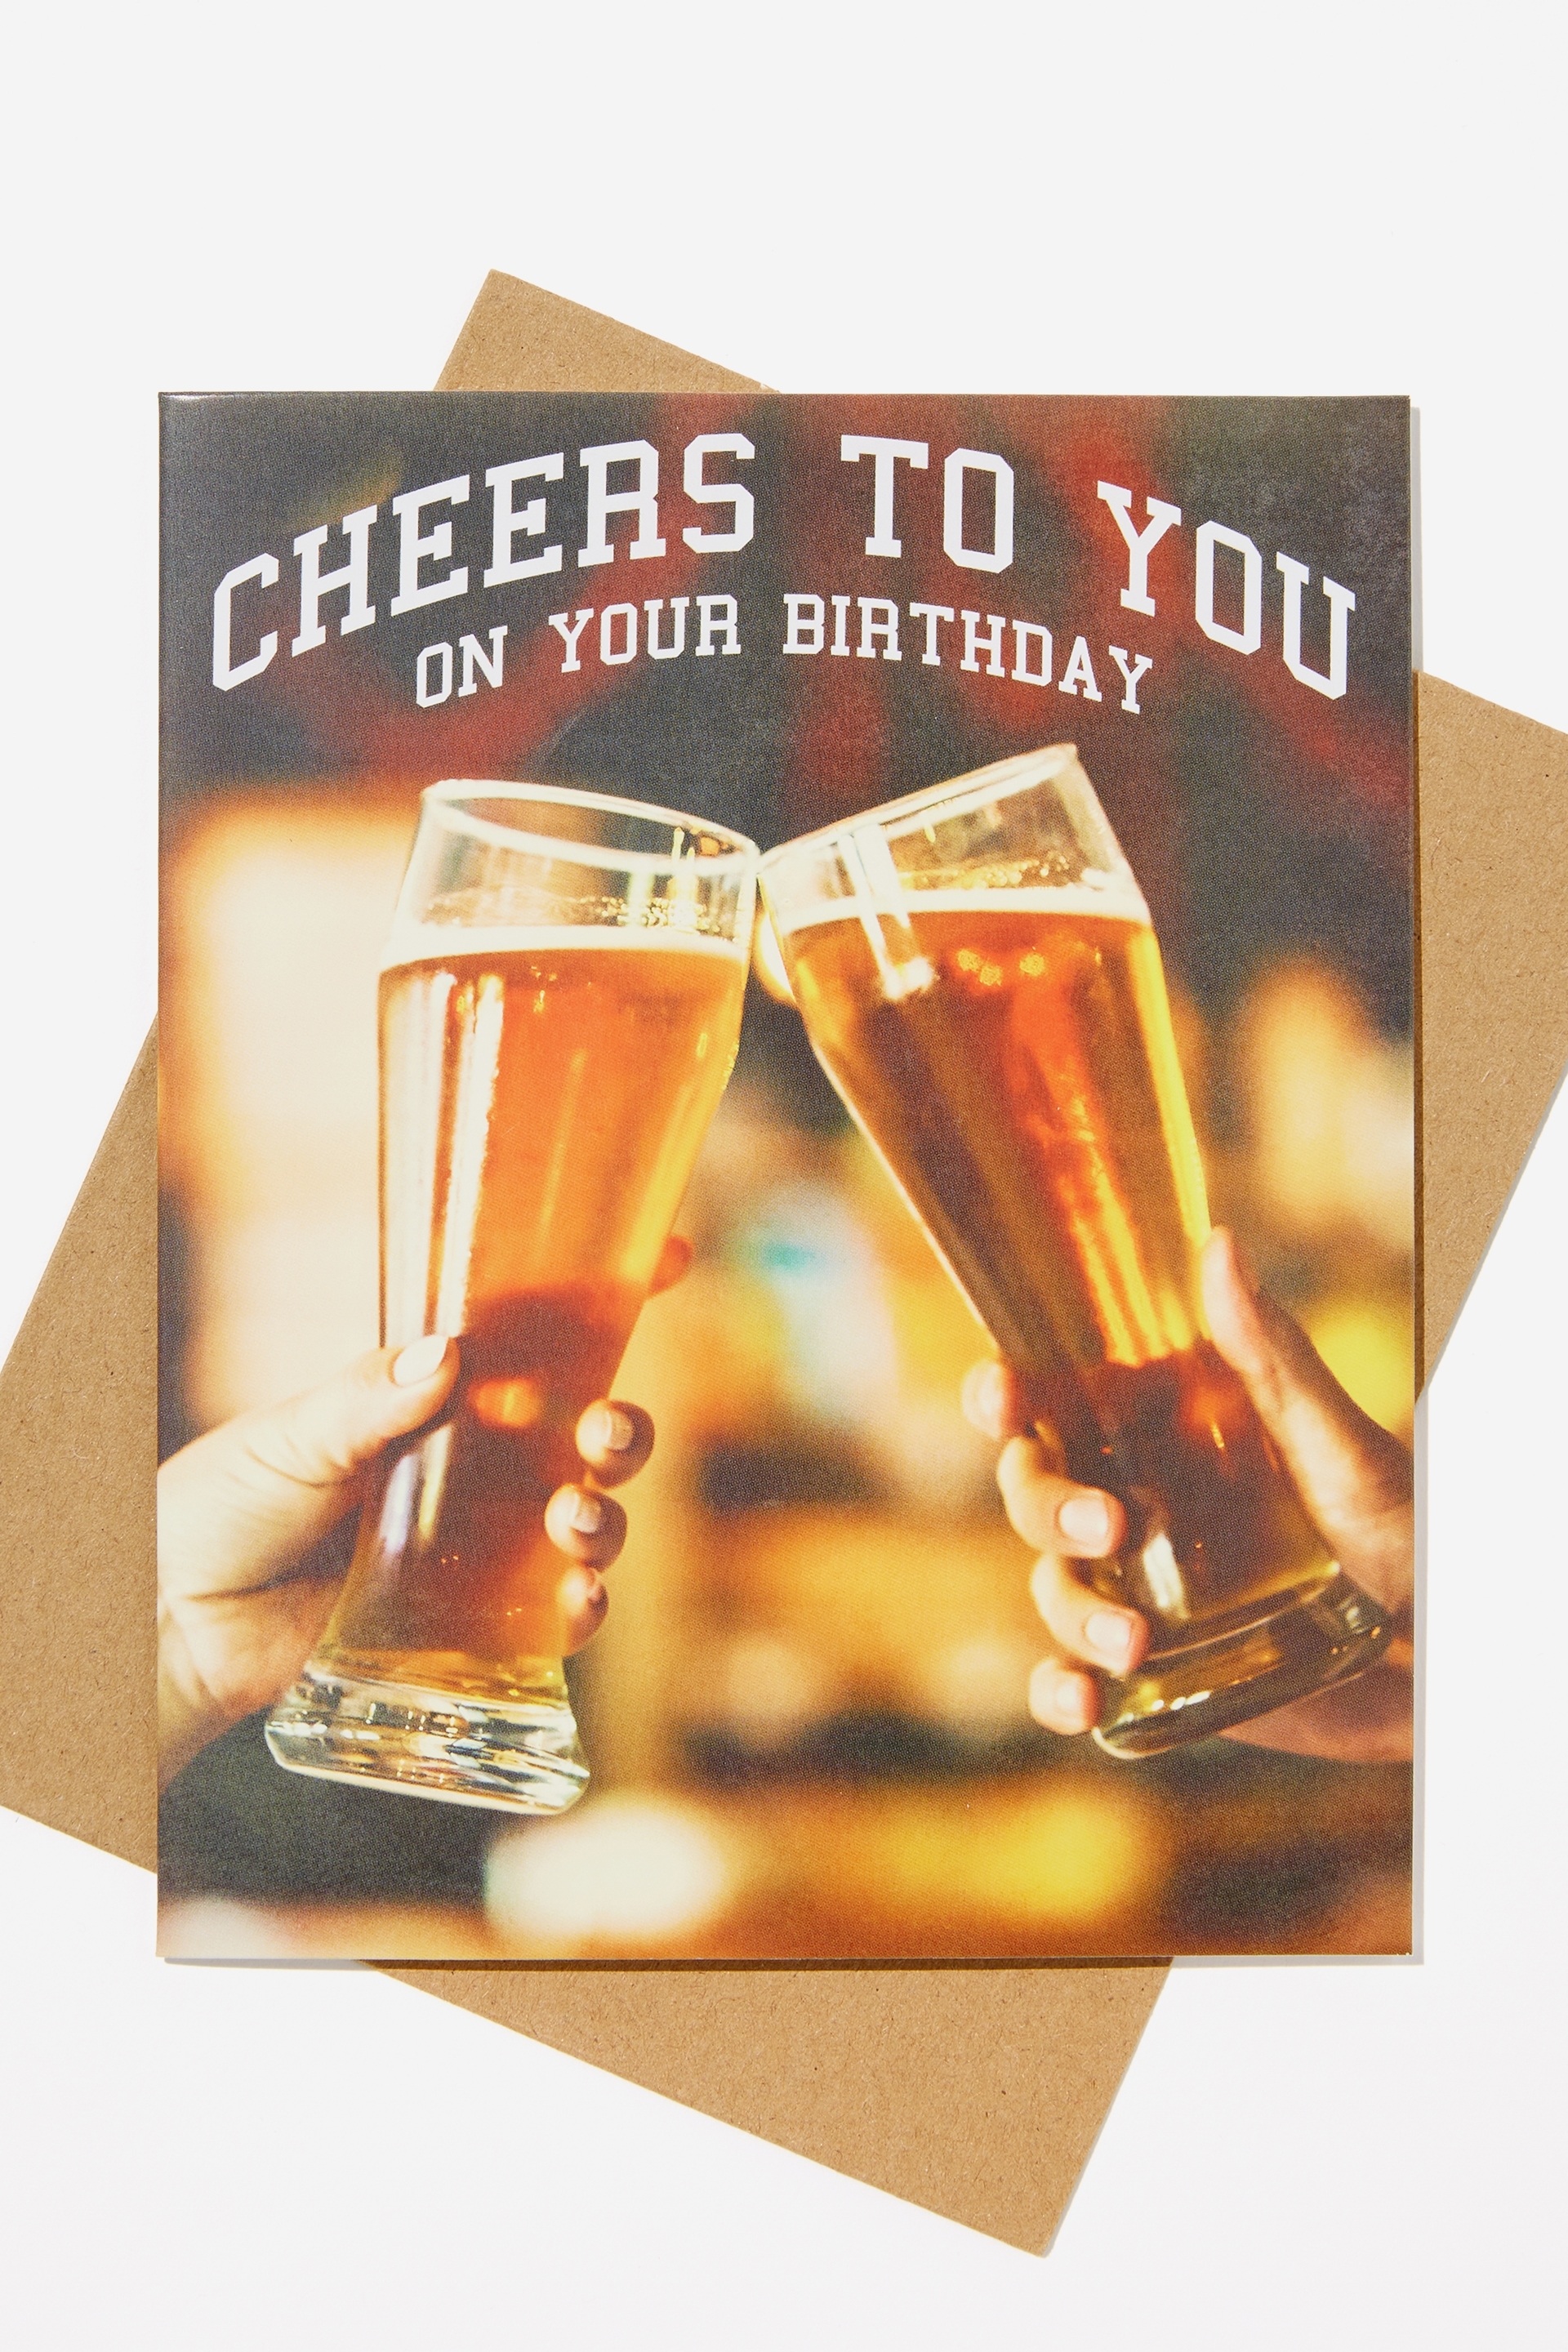 Typo - Nice Birthday Card - Cheers to you on your birthday